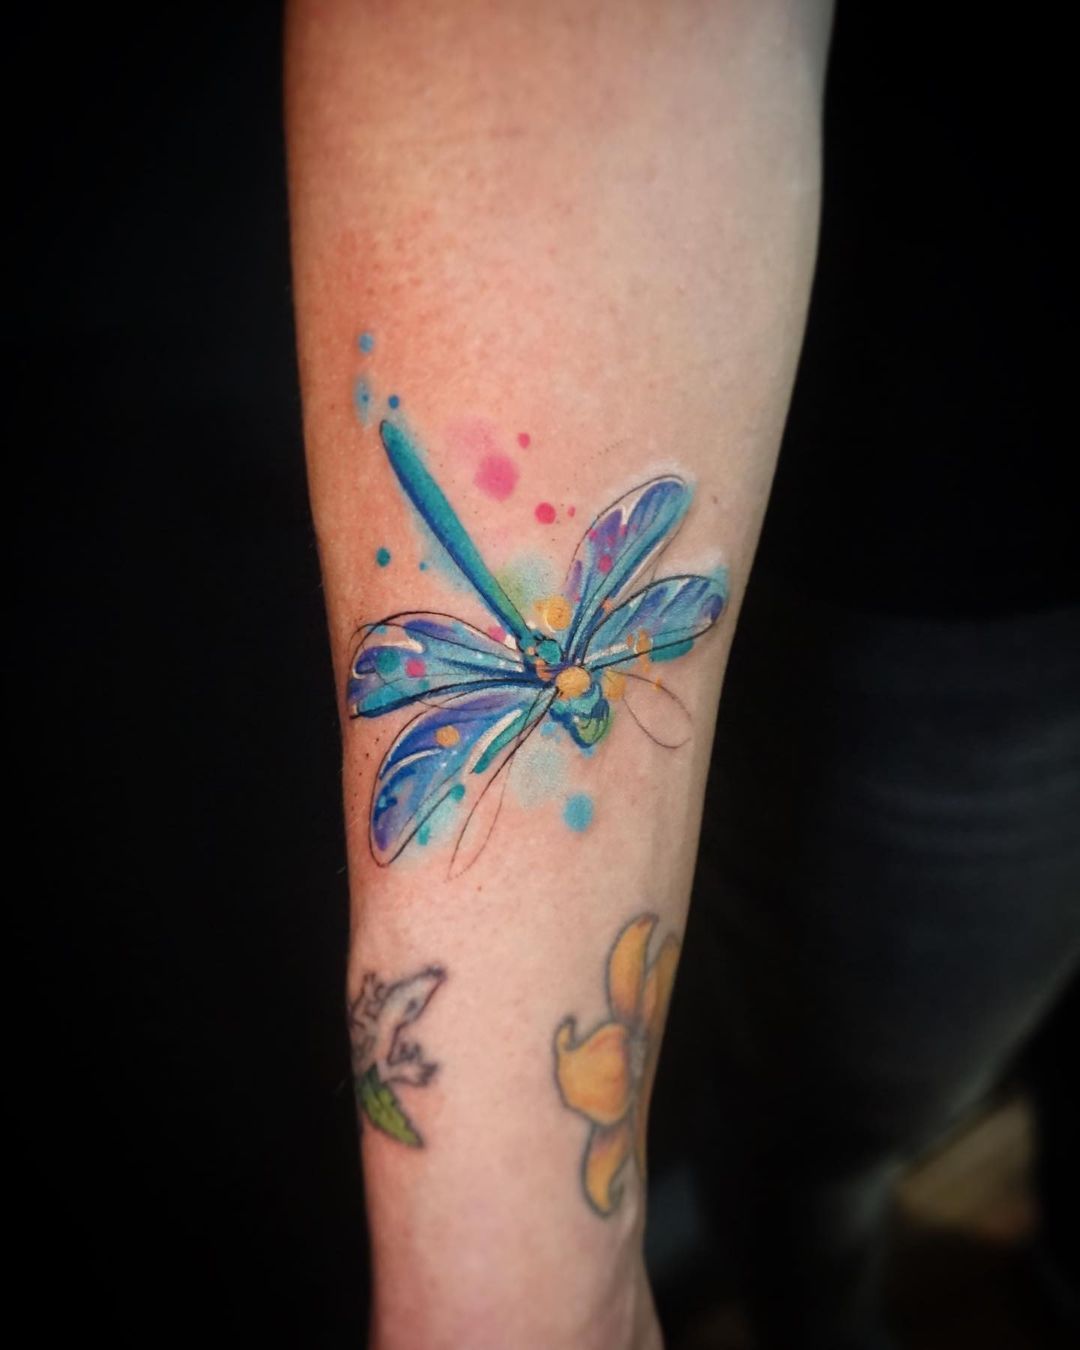 Washed out dragonfly tattoo. Bringing in washed out effects is the perfect  theme for drago… | Dragonfly tattoo, Watercolor dragonfly tattoo, Dragonfly  tattoo design